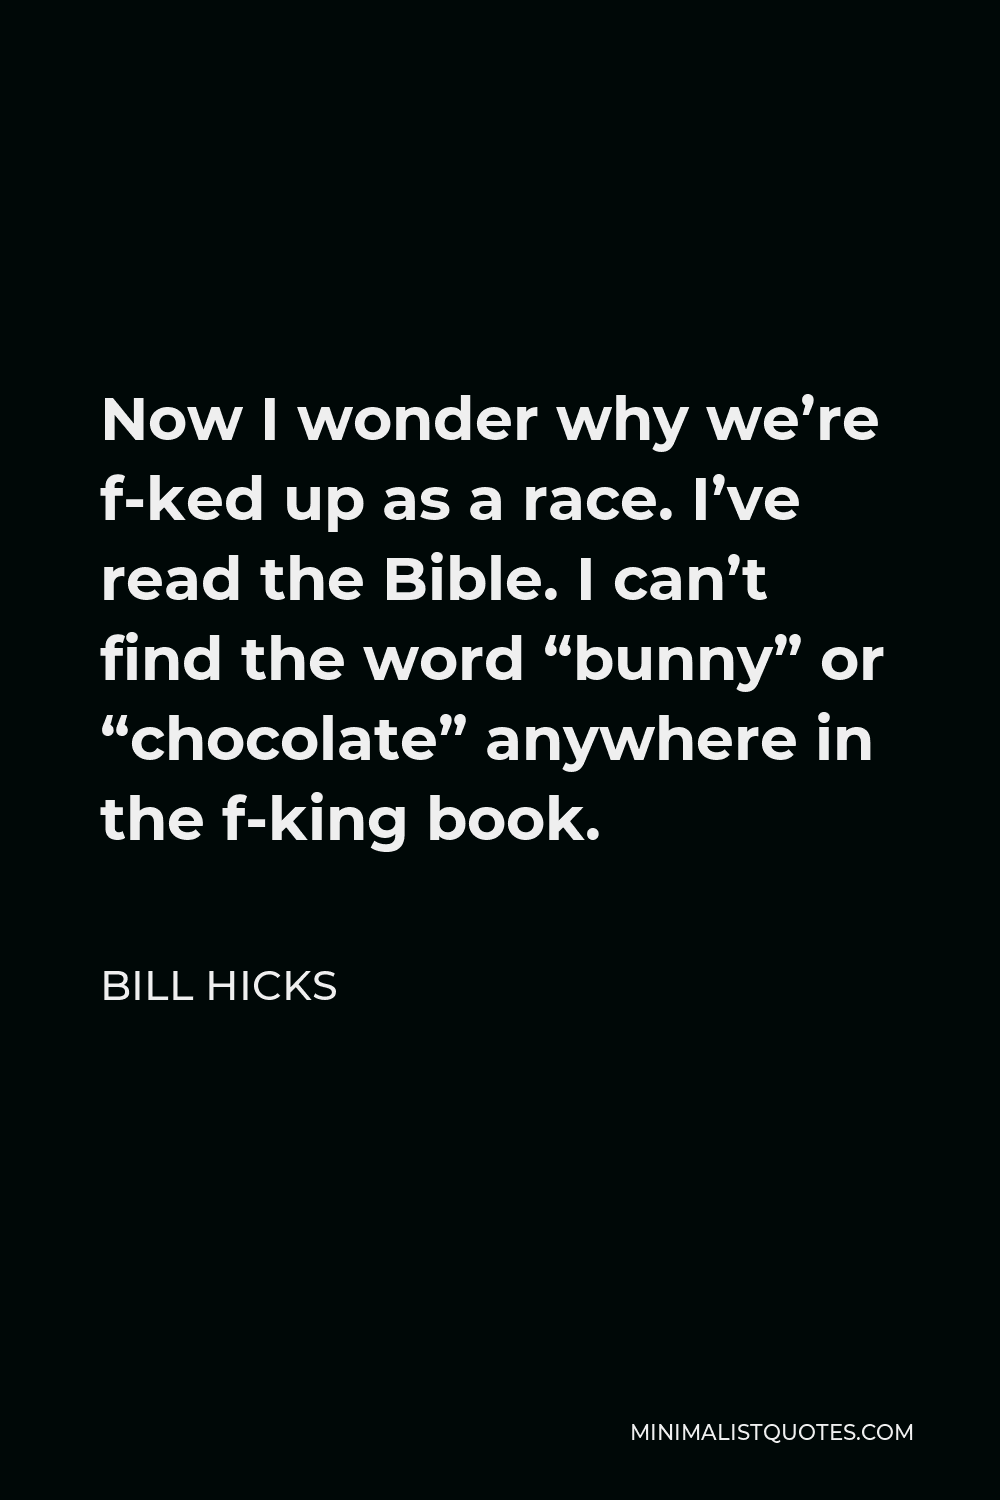 Bill Hicks Quote - Now I wonder why we’re f-ked up as a race. I’ve read the Bible. I can’t find the word “bunny” or “chocolate” anywhere in the f-king book.